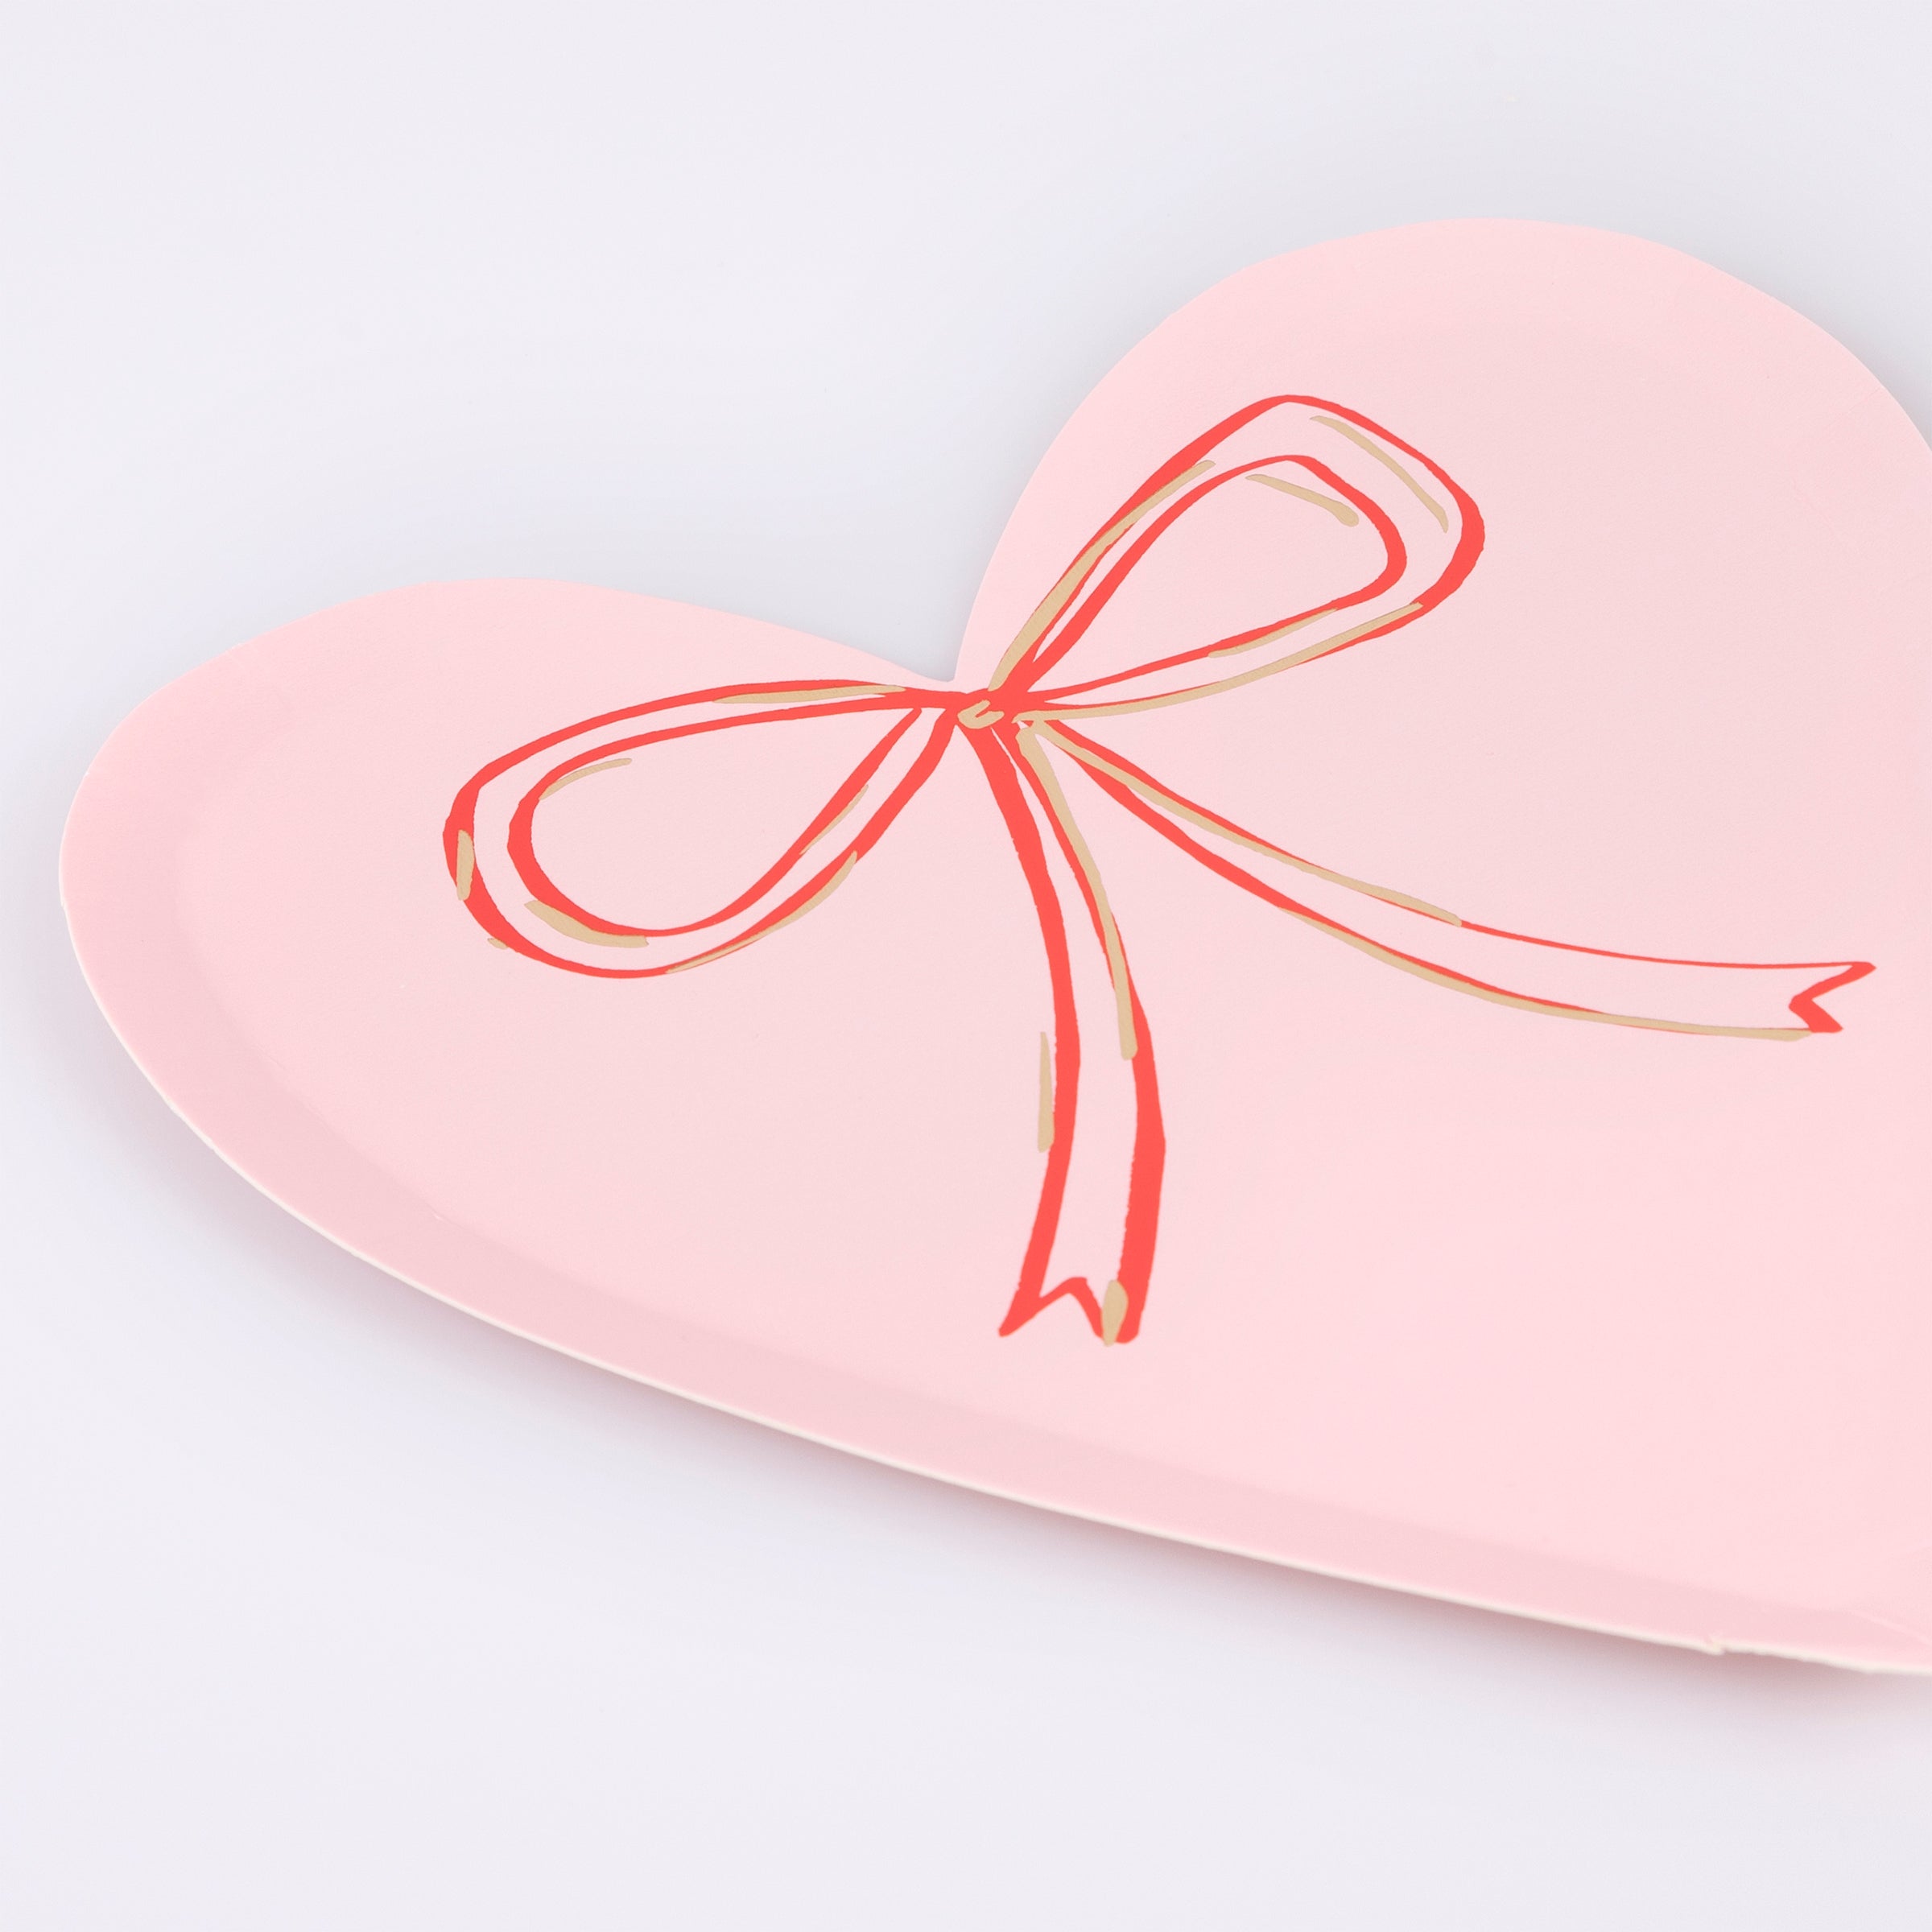 Our party plates, with red and pink hearts with on-trend bows, will look amazing for your Valentines party.